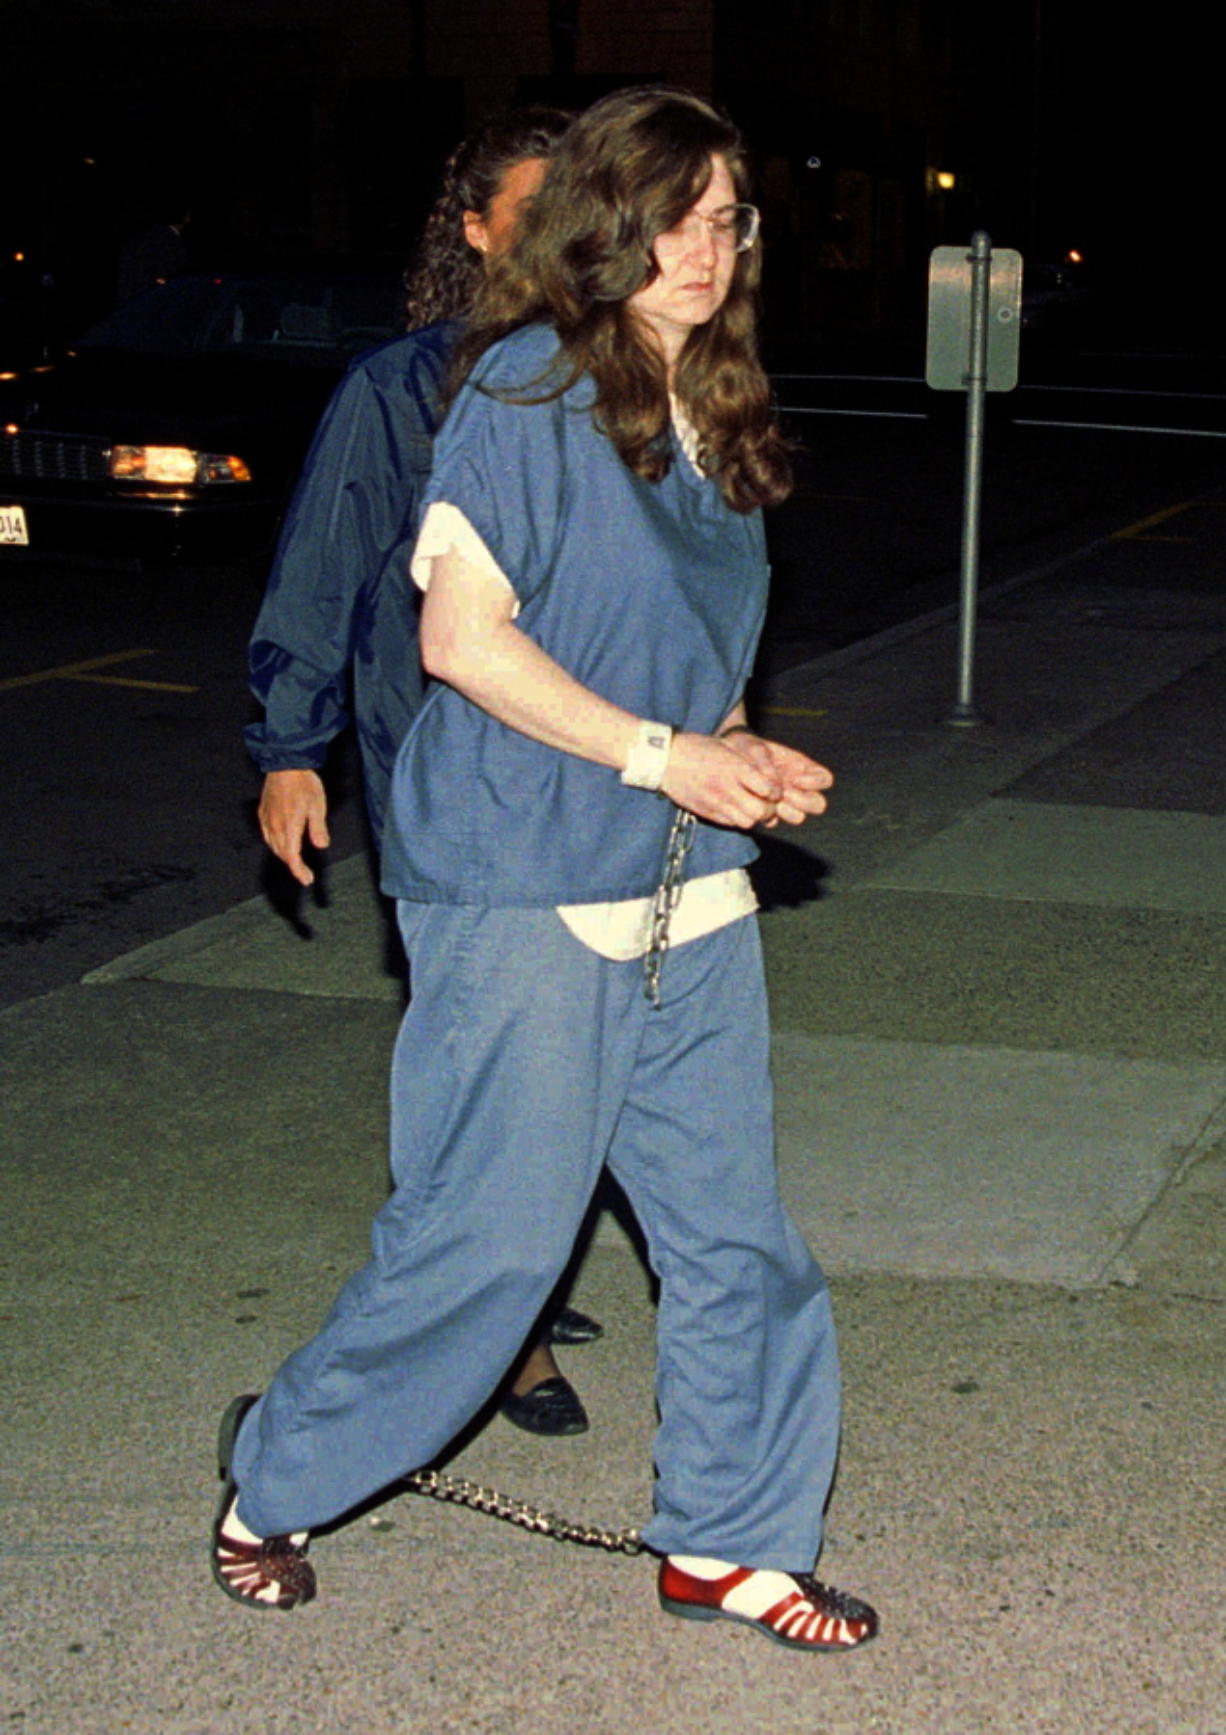 Rachelle “Shelley” Shannon arrives for sentencing in federal court in downtown Portland, Sept. 8, 1995.